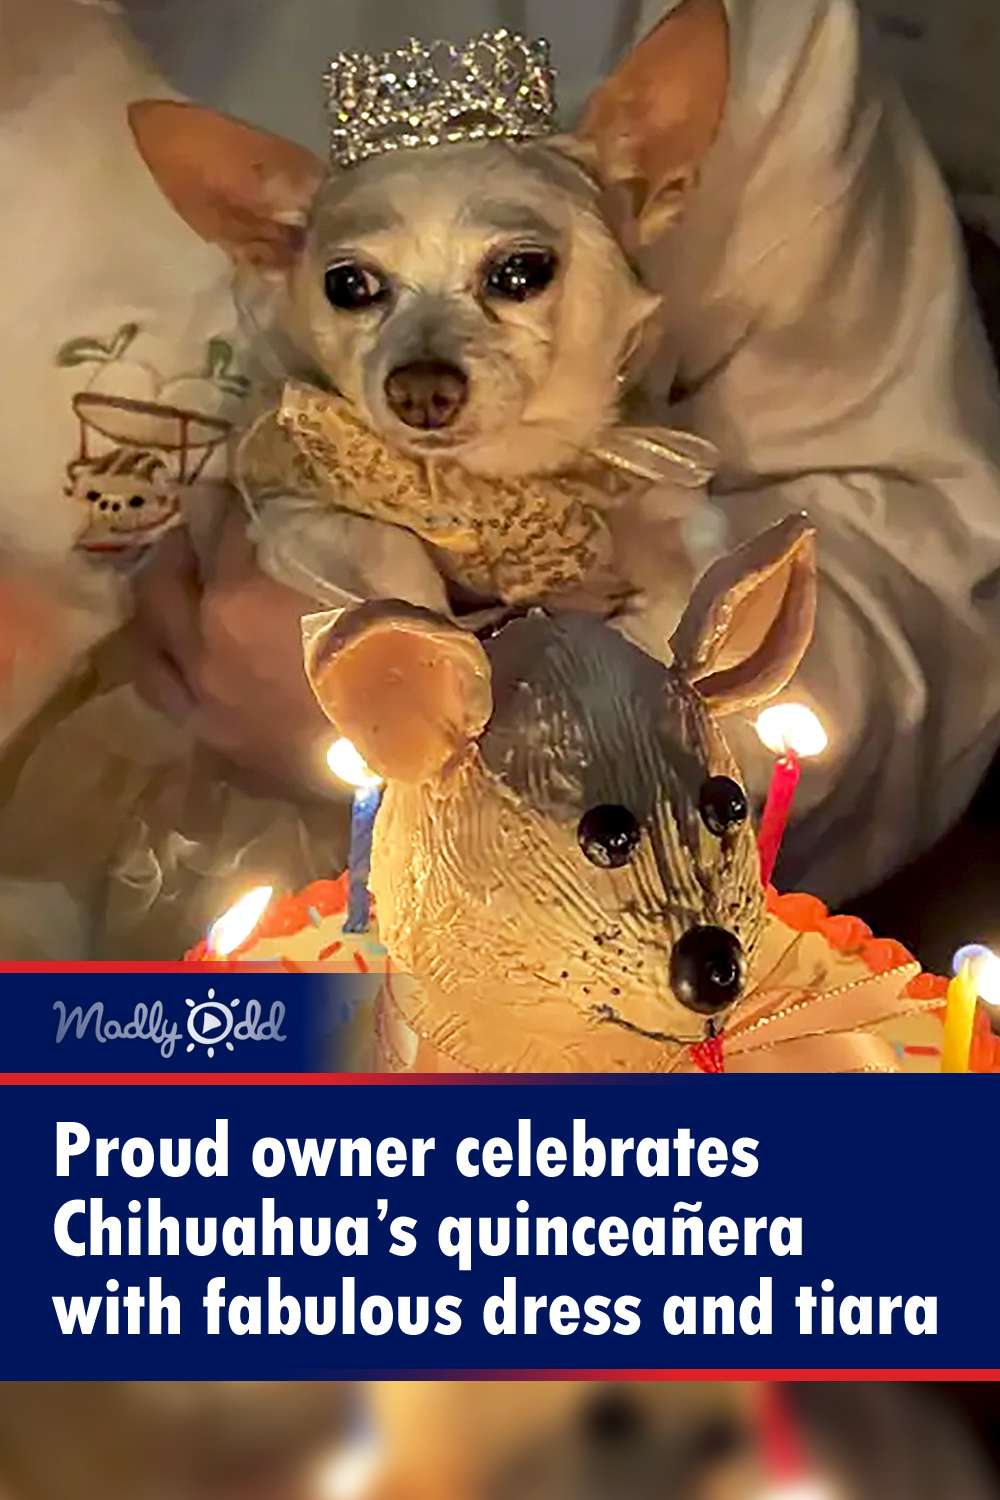 Proud owner celebrates Chihuahua’s quinceañera with fabulous dress and tiara